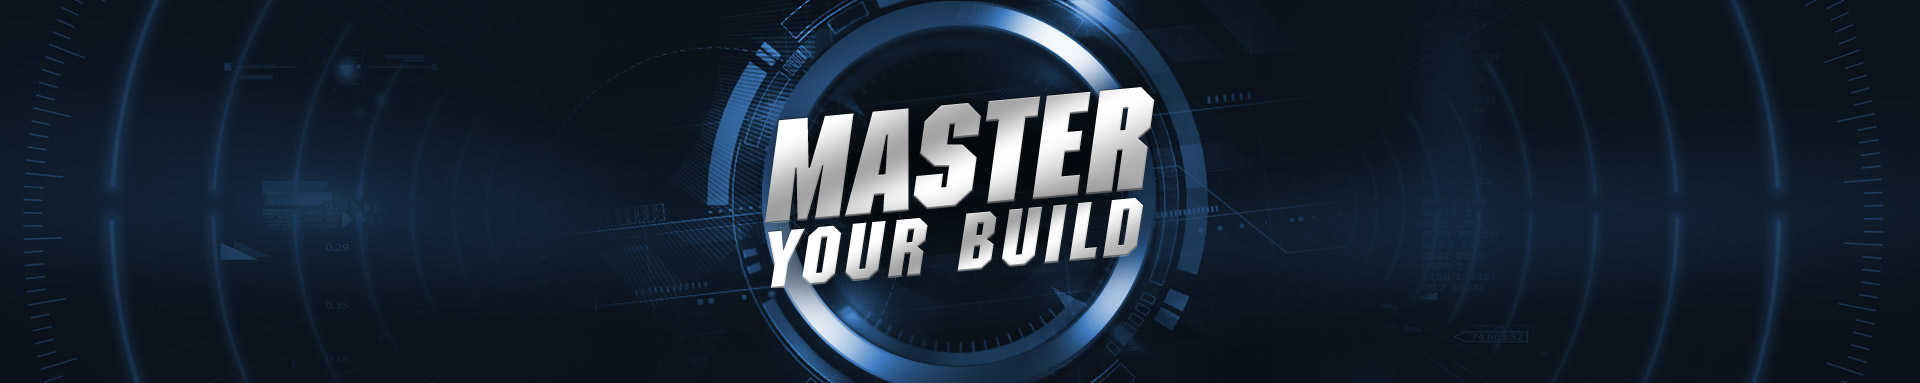 MASTER YOUR BUILD